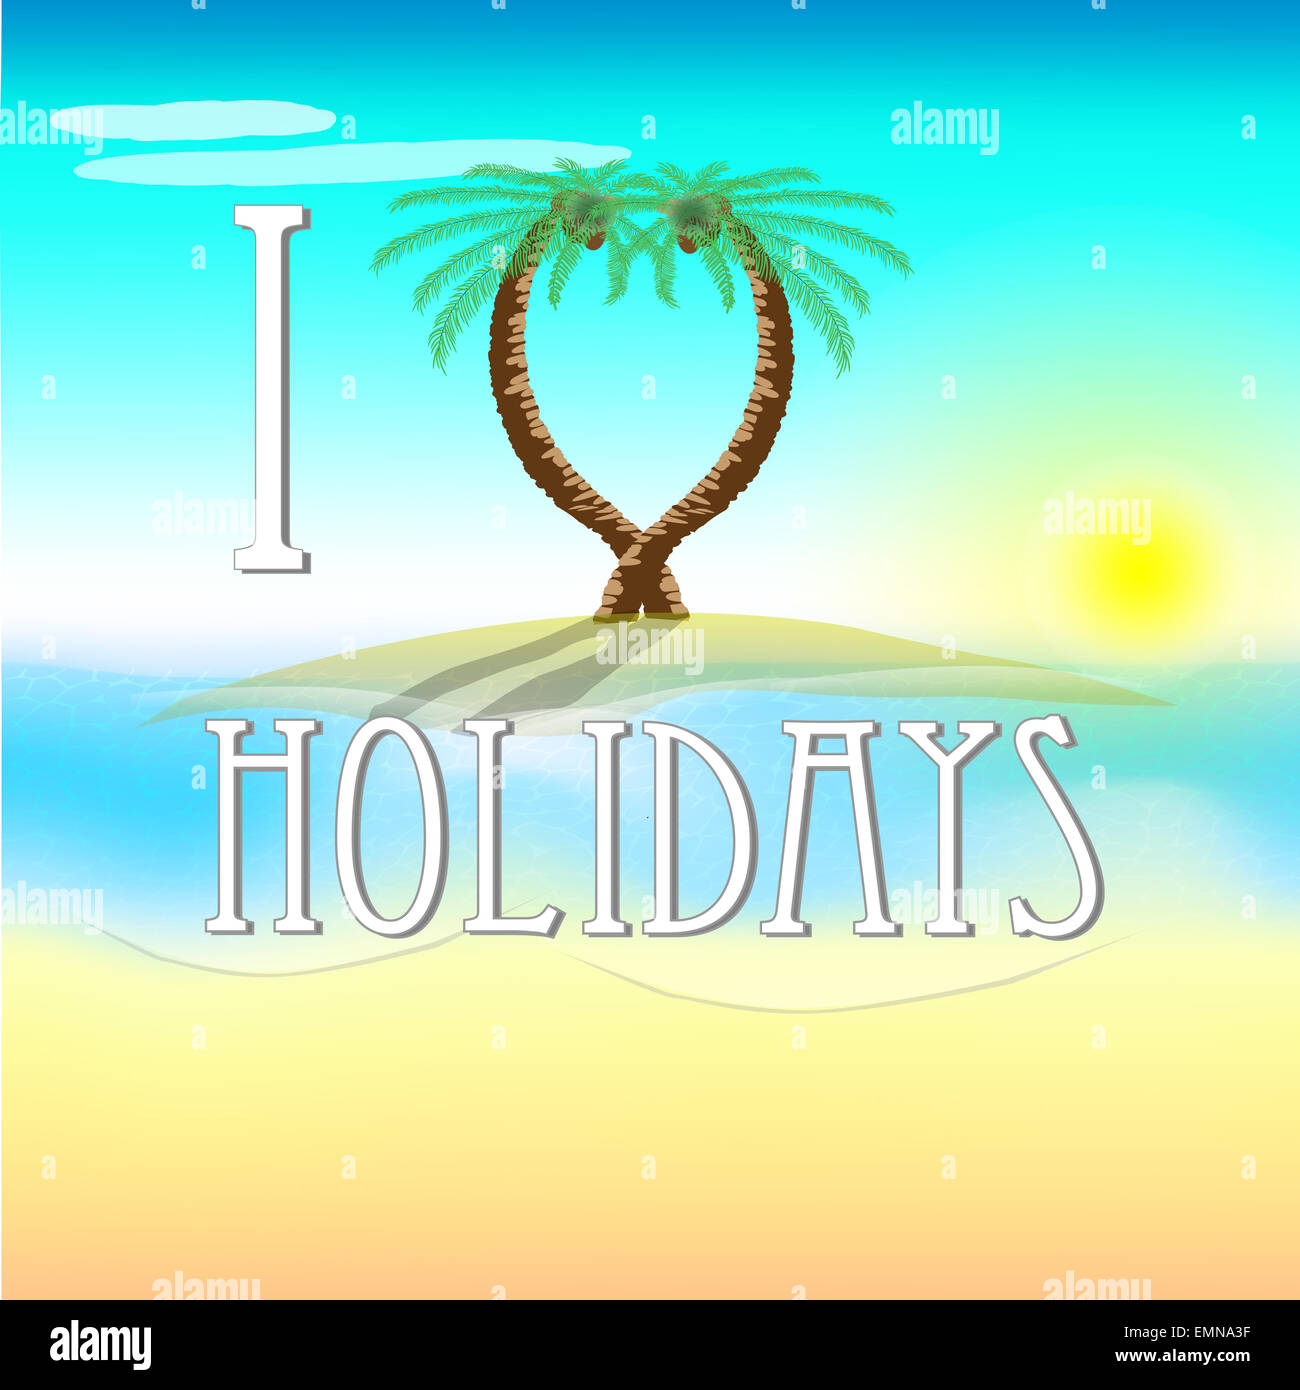 Illustration of hollidays on beach with love palm trees and sun Stock Photo